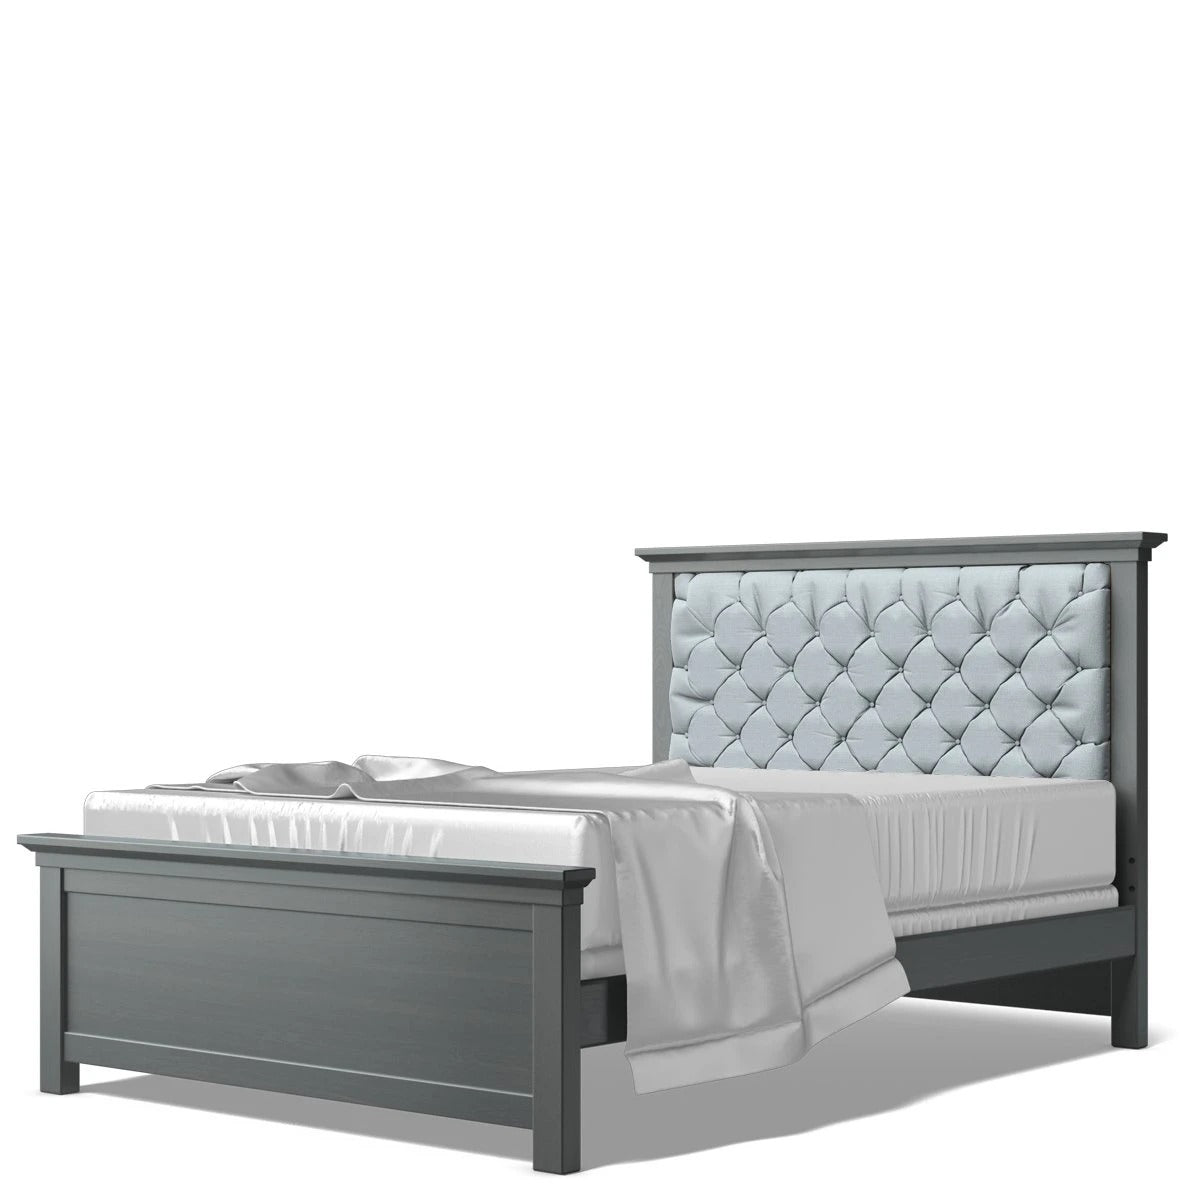 Full Bed Tufted Headboard Washed Grey with Grey